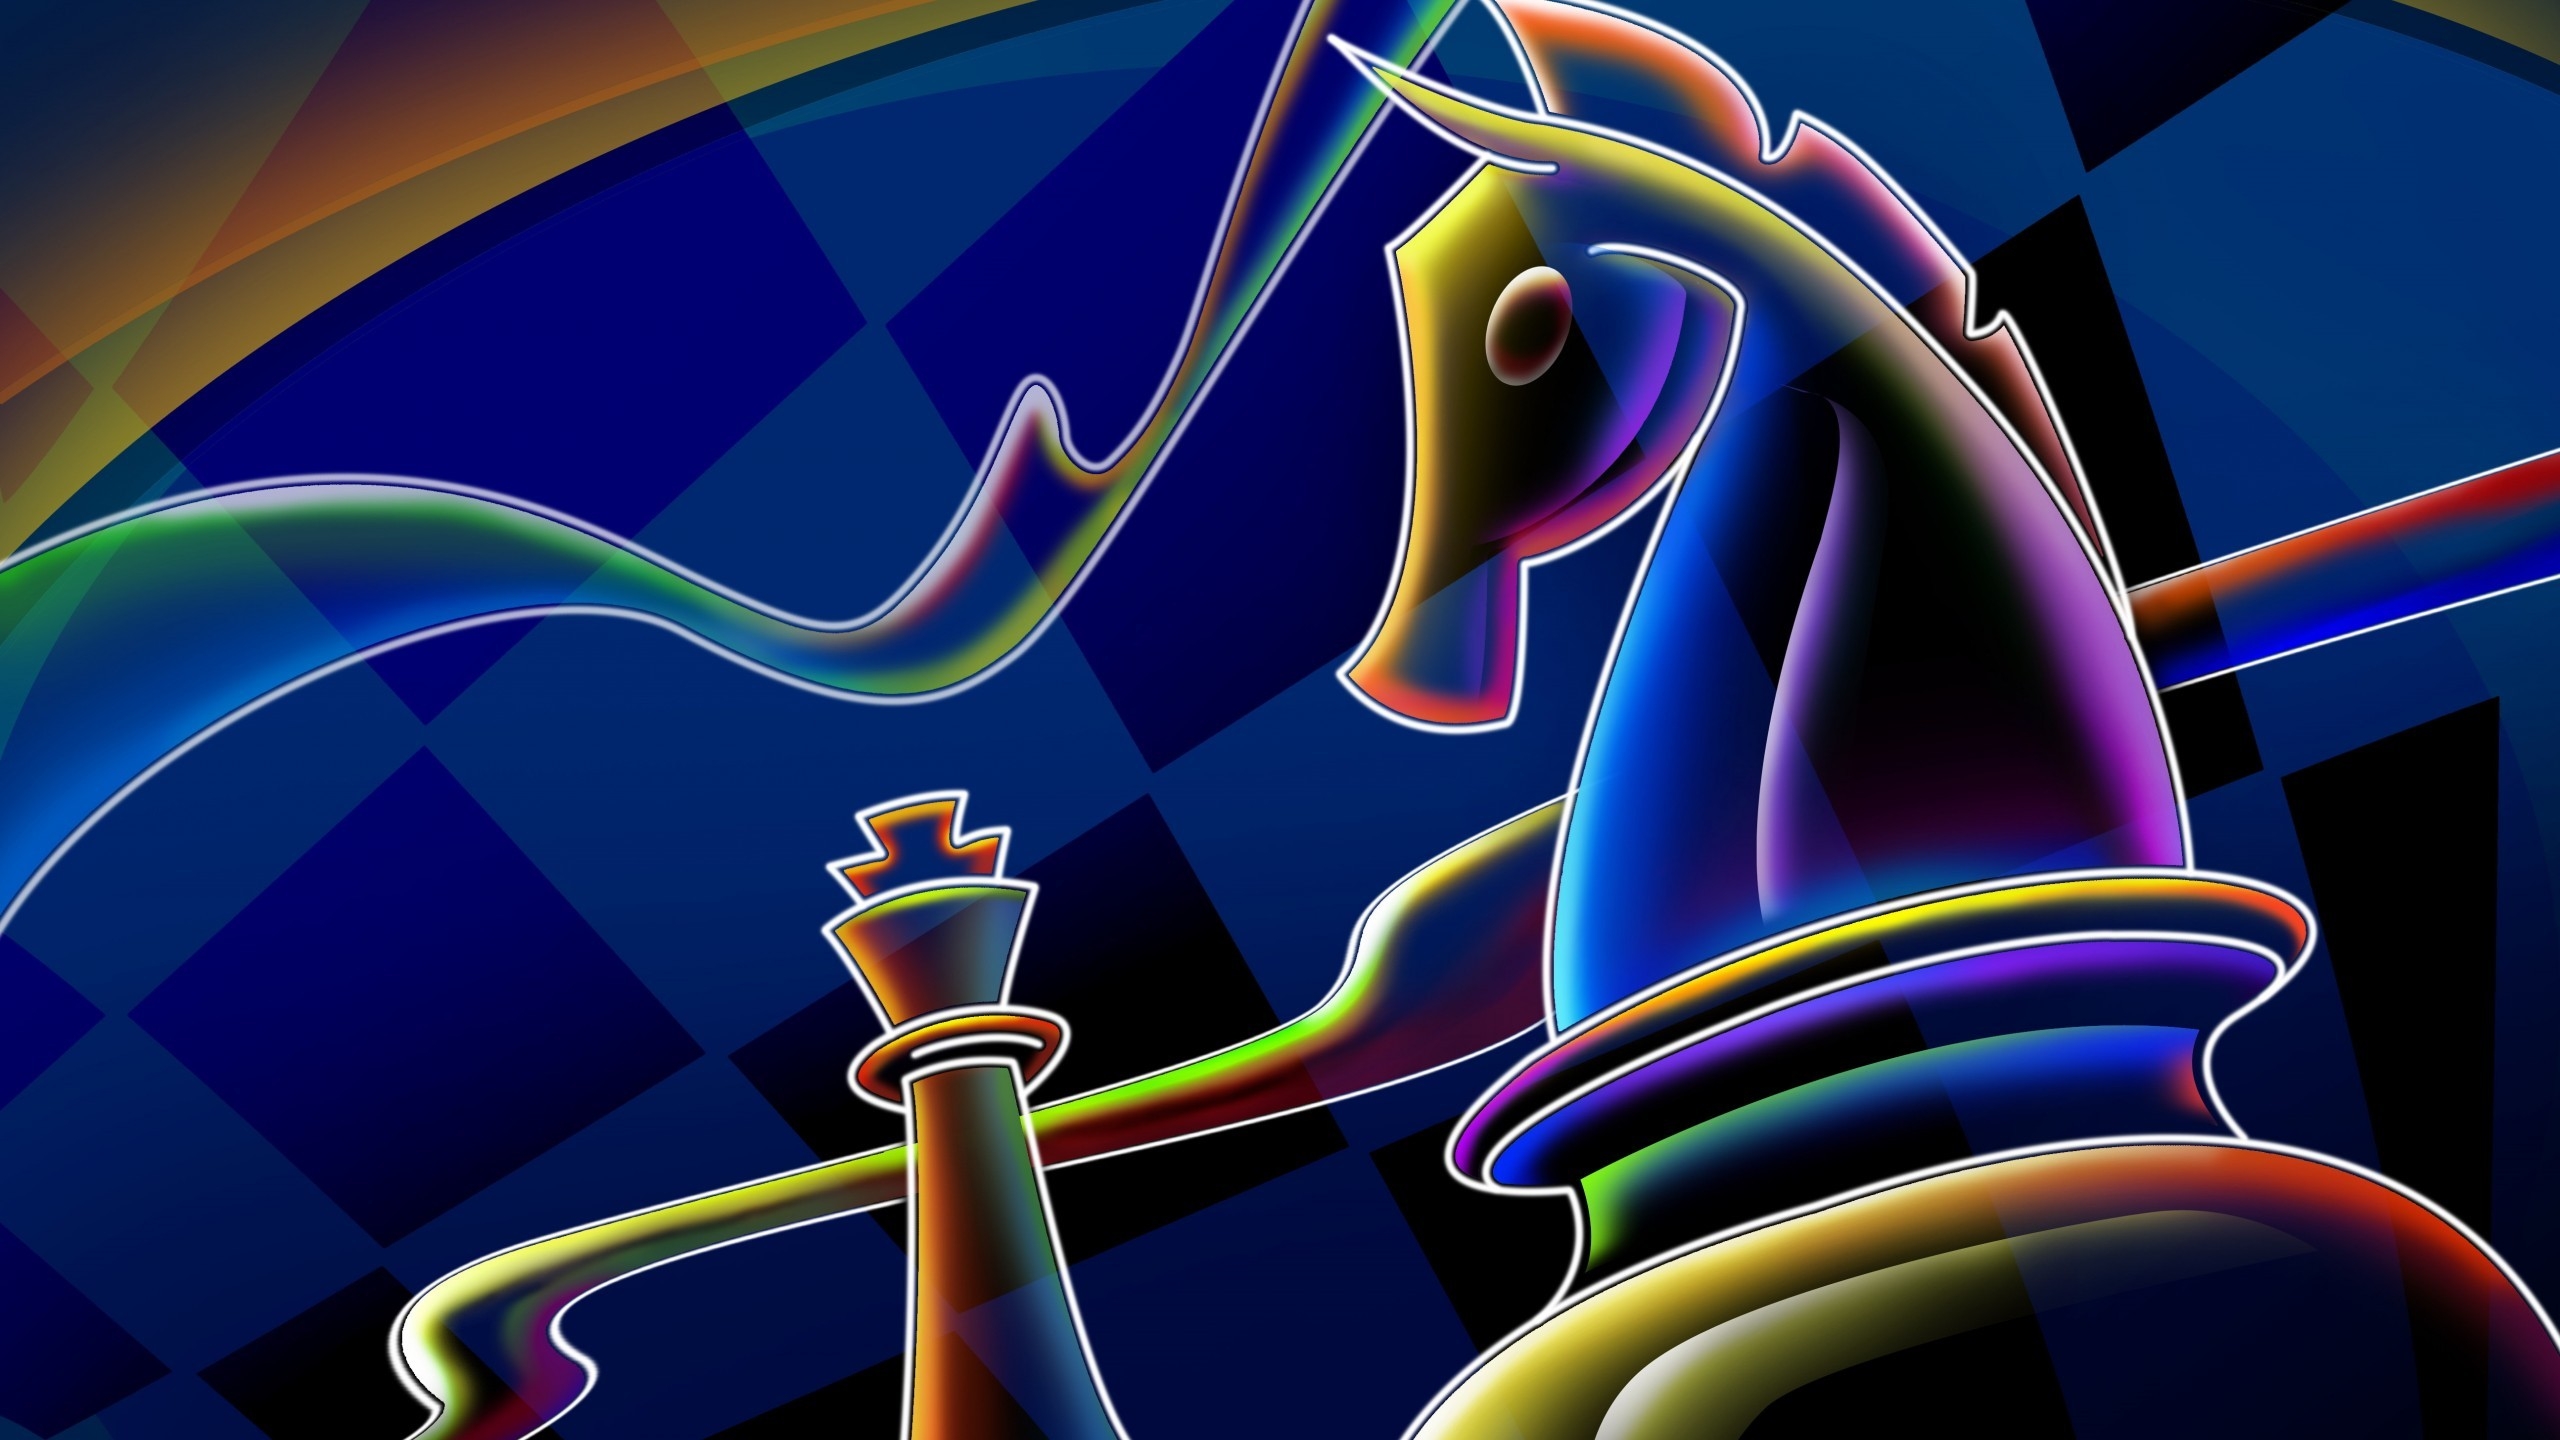 Chess Pieces Drawing for 2560x1440 HDTV resolution